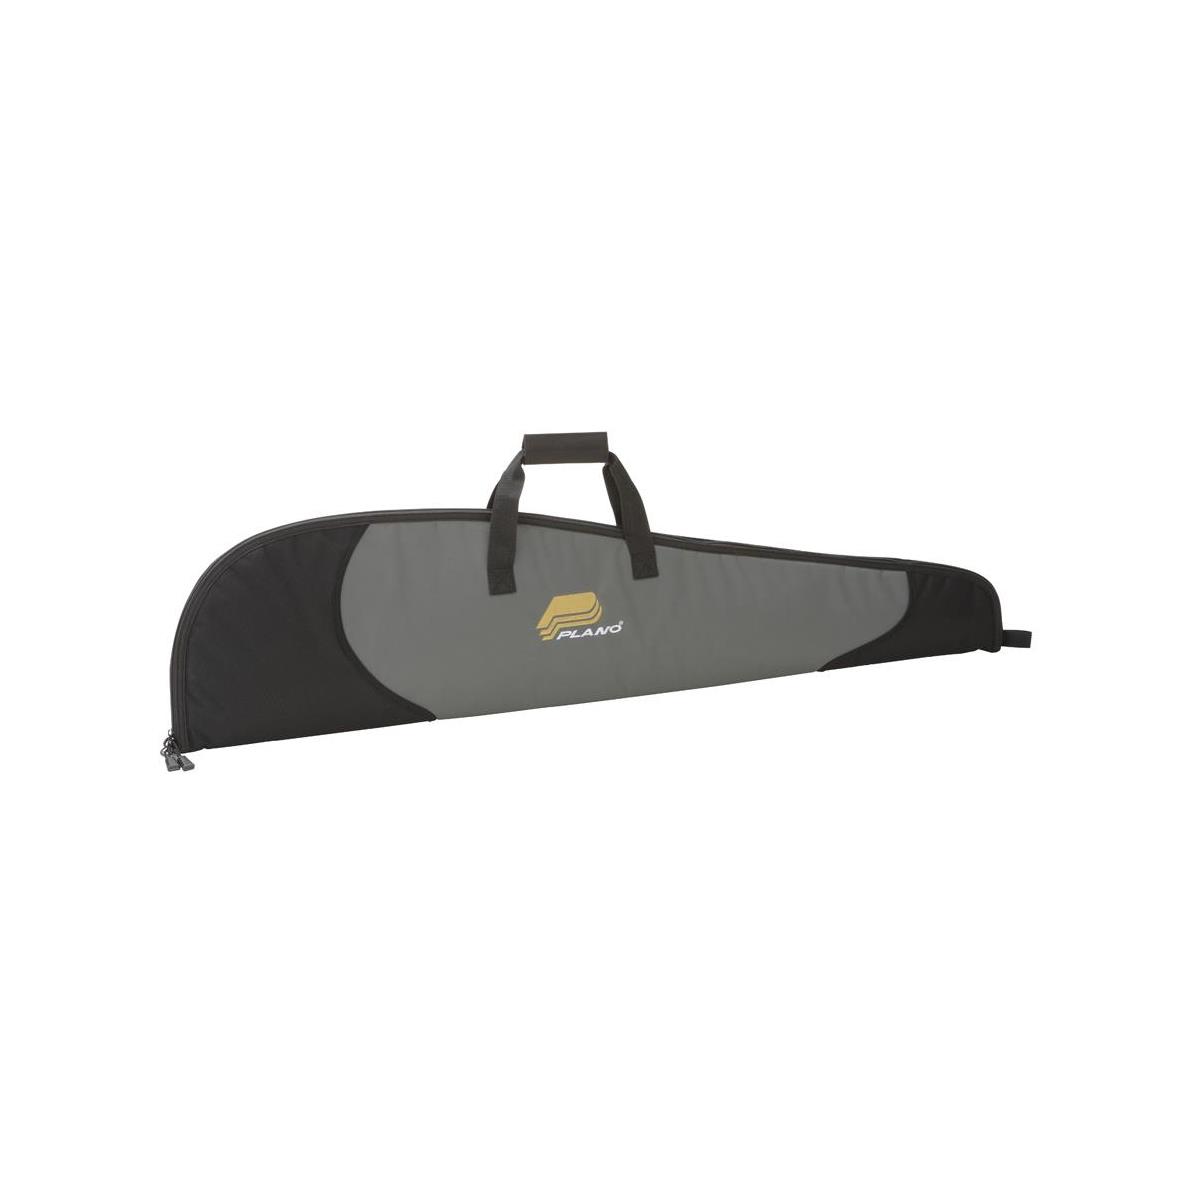 Image of Plano 200 Series Gun Guard Rifle Case with High Density Foam